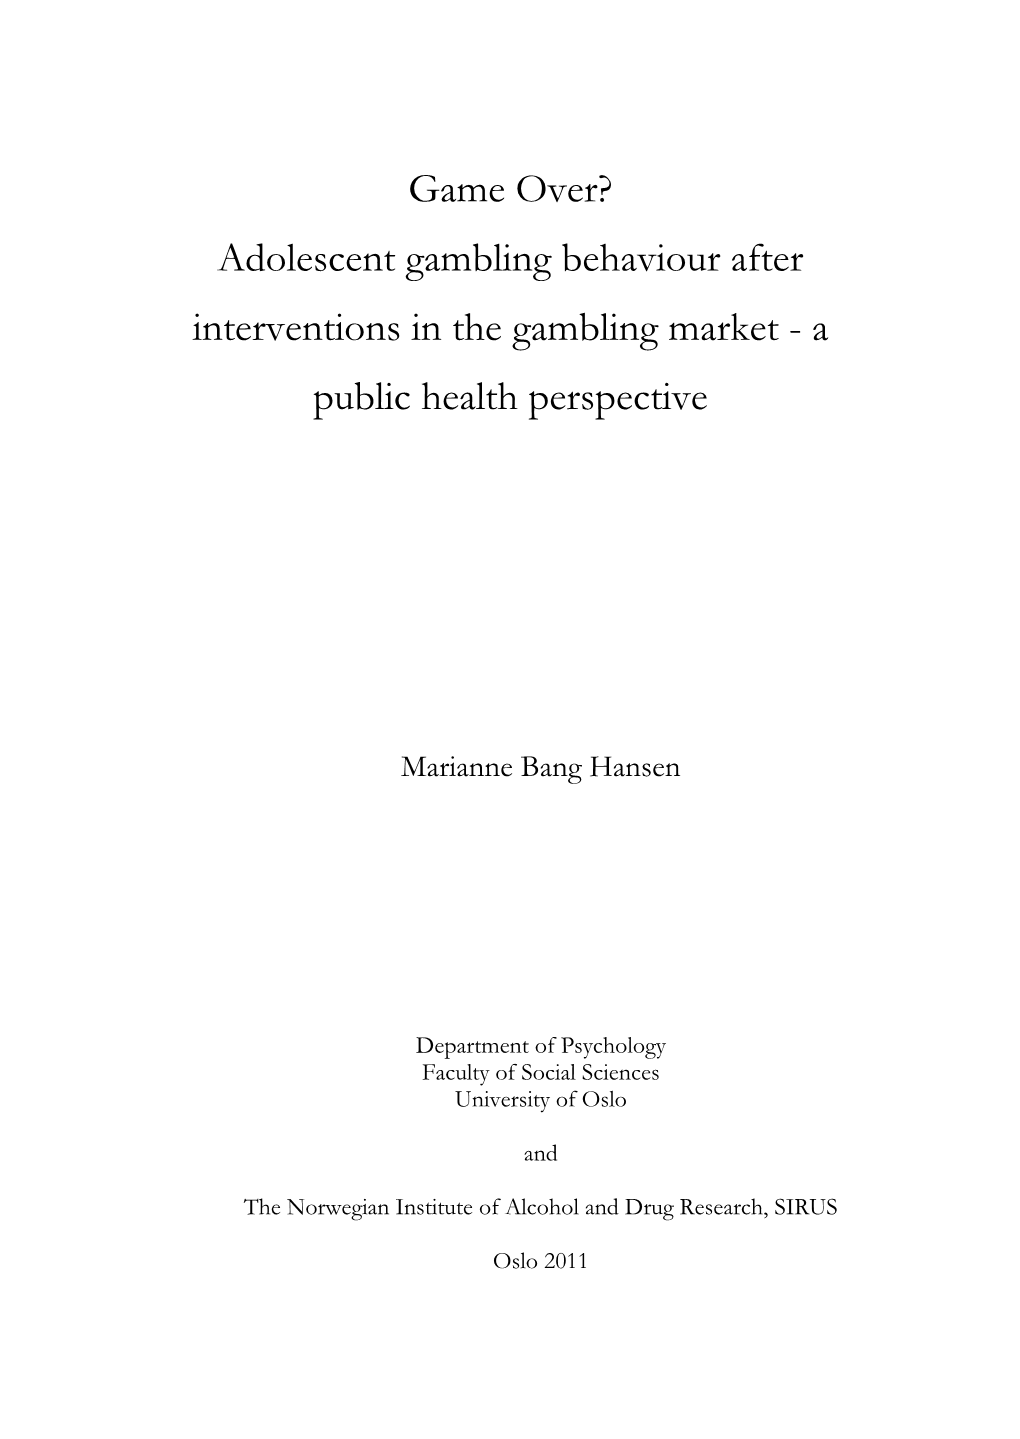 Adolescent Gambling Behaviour After Interventions in the Gambling Market - a Public Health Perspective